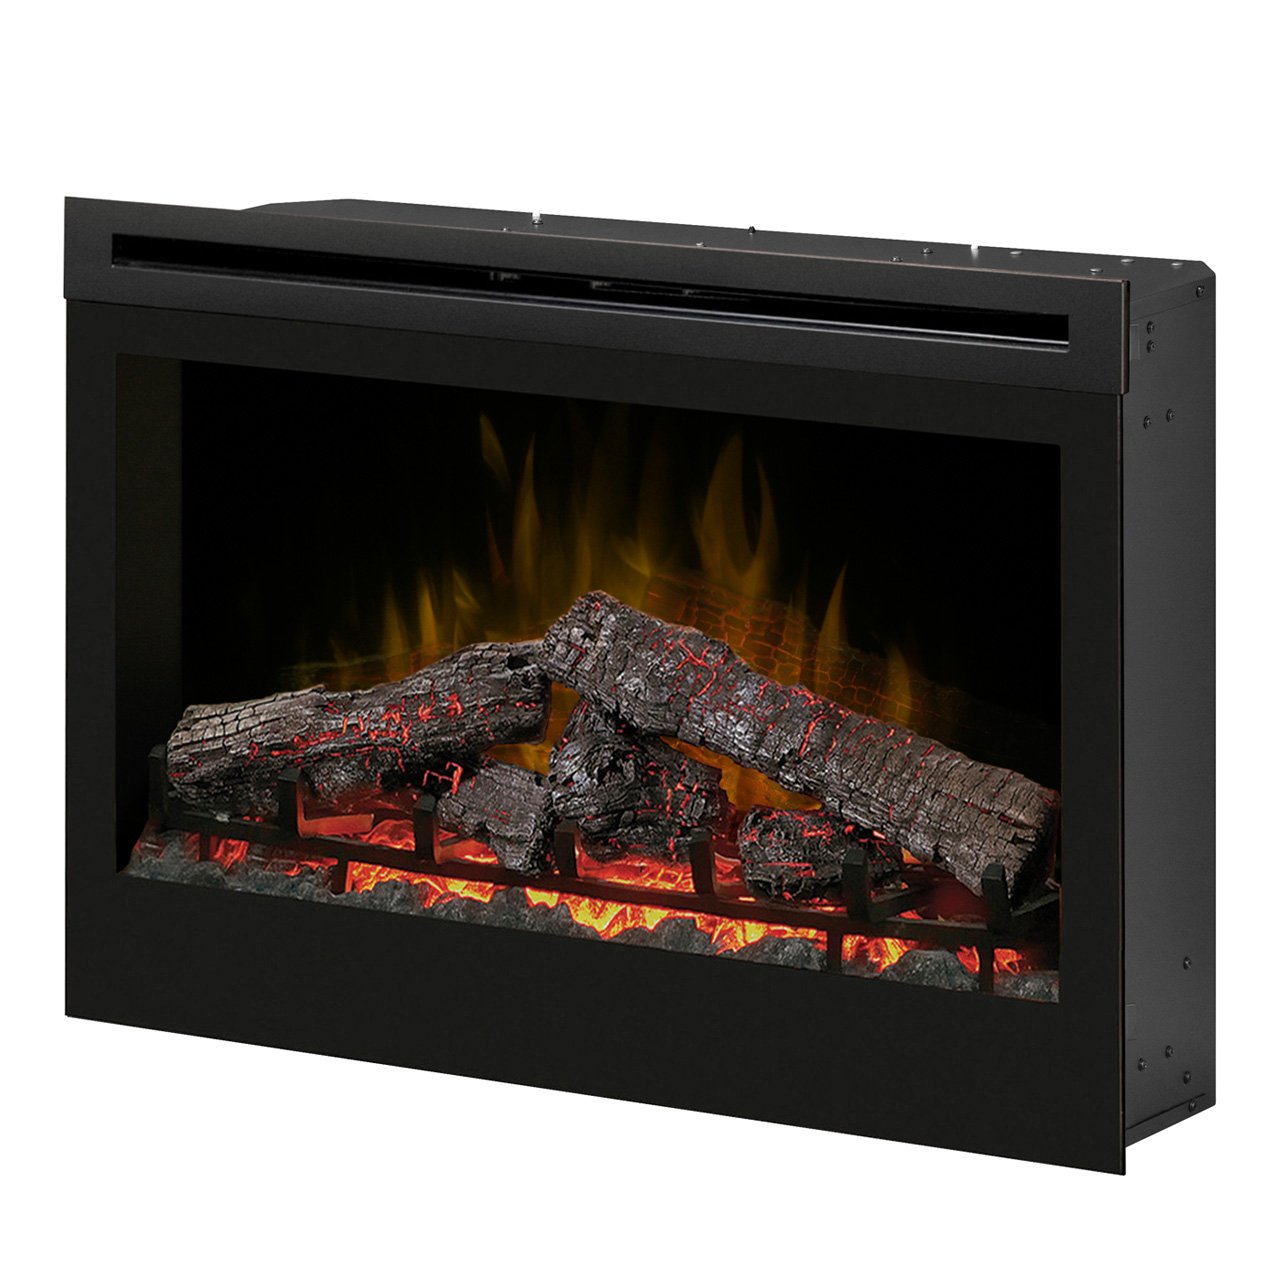 Home Gas Fireplace Beautiful Dimplex Df3033st 33 Inch Self Trimming Electric Fireplace Insert